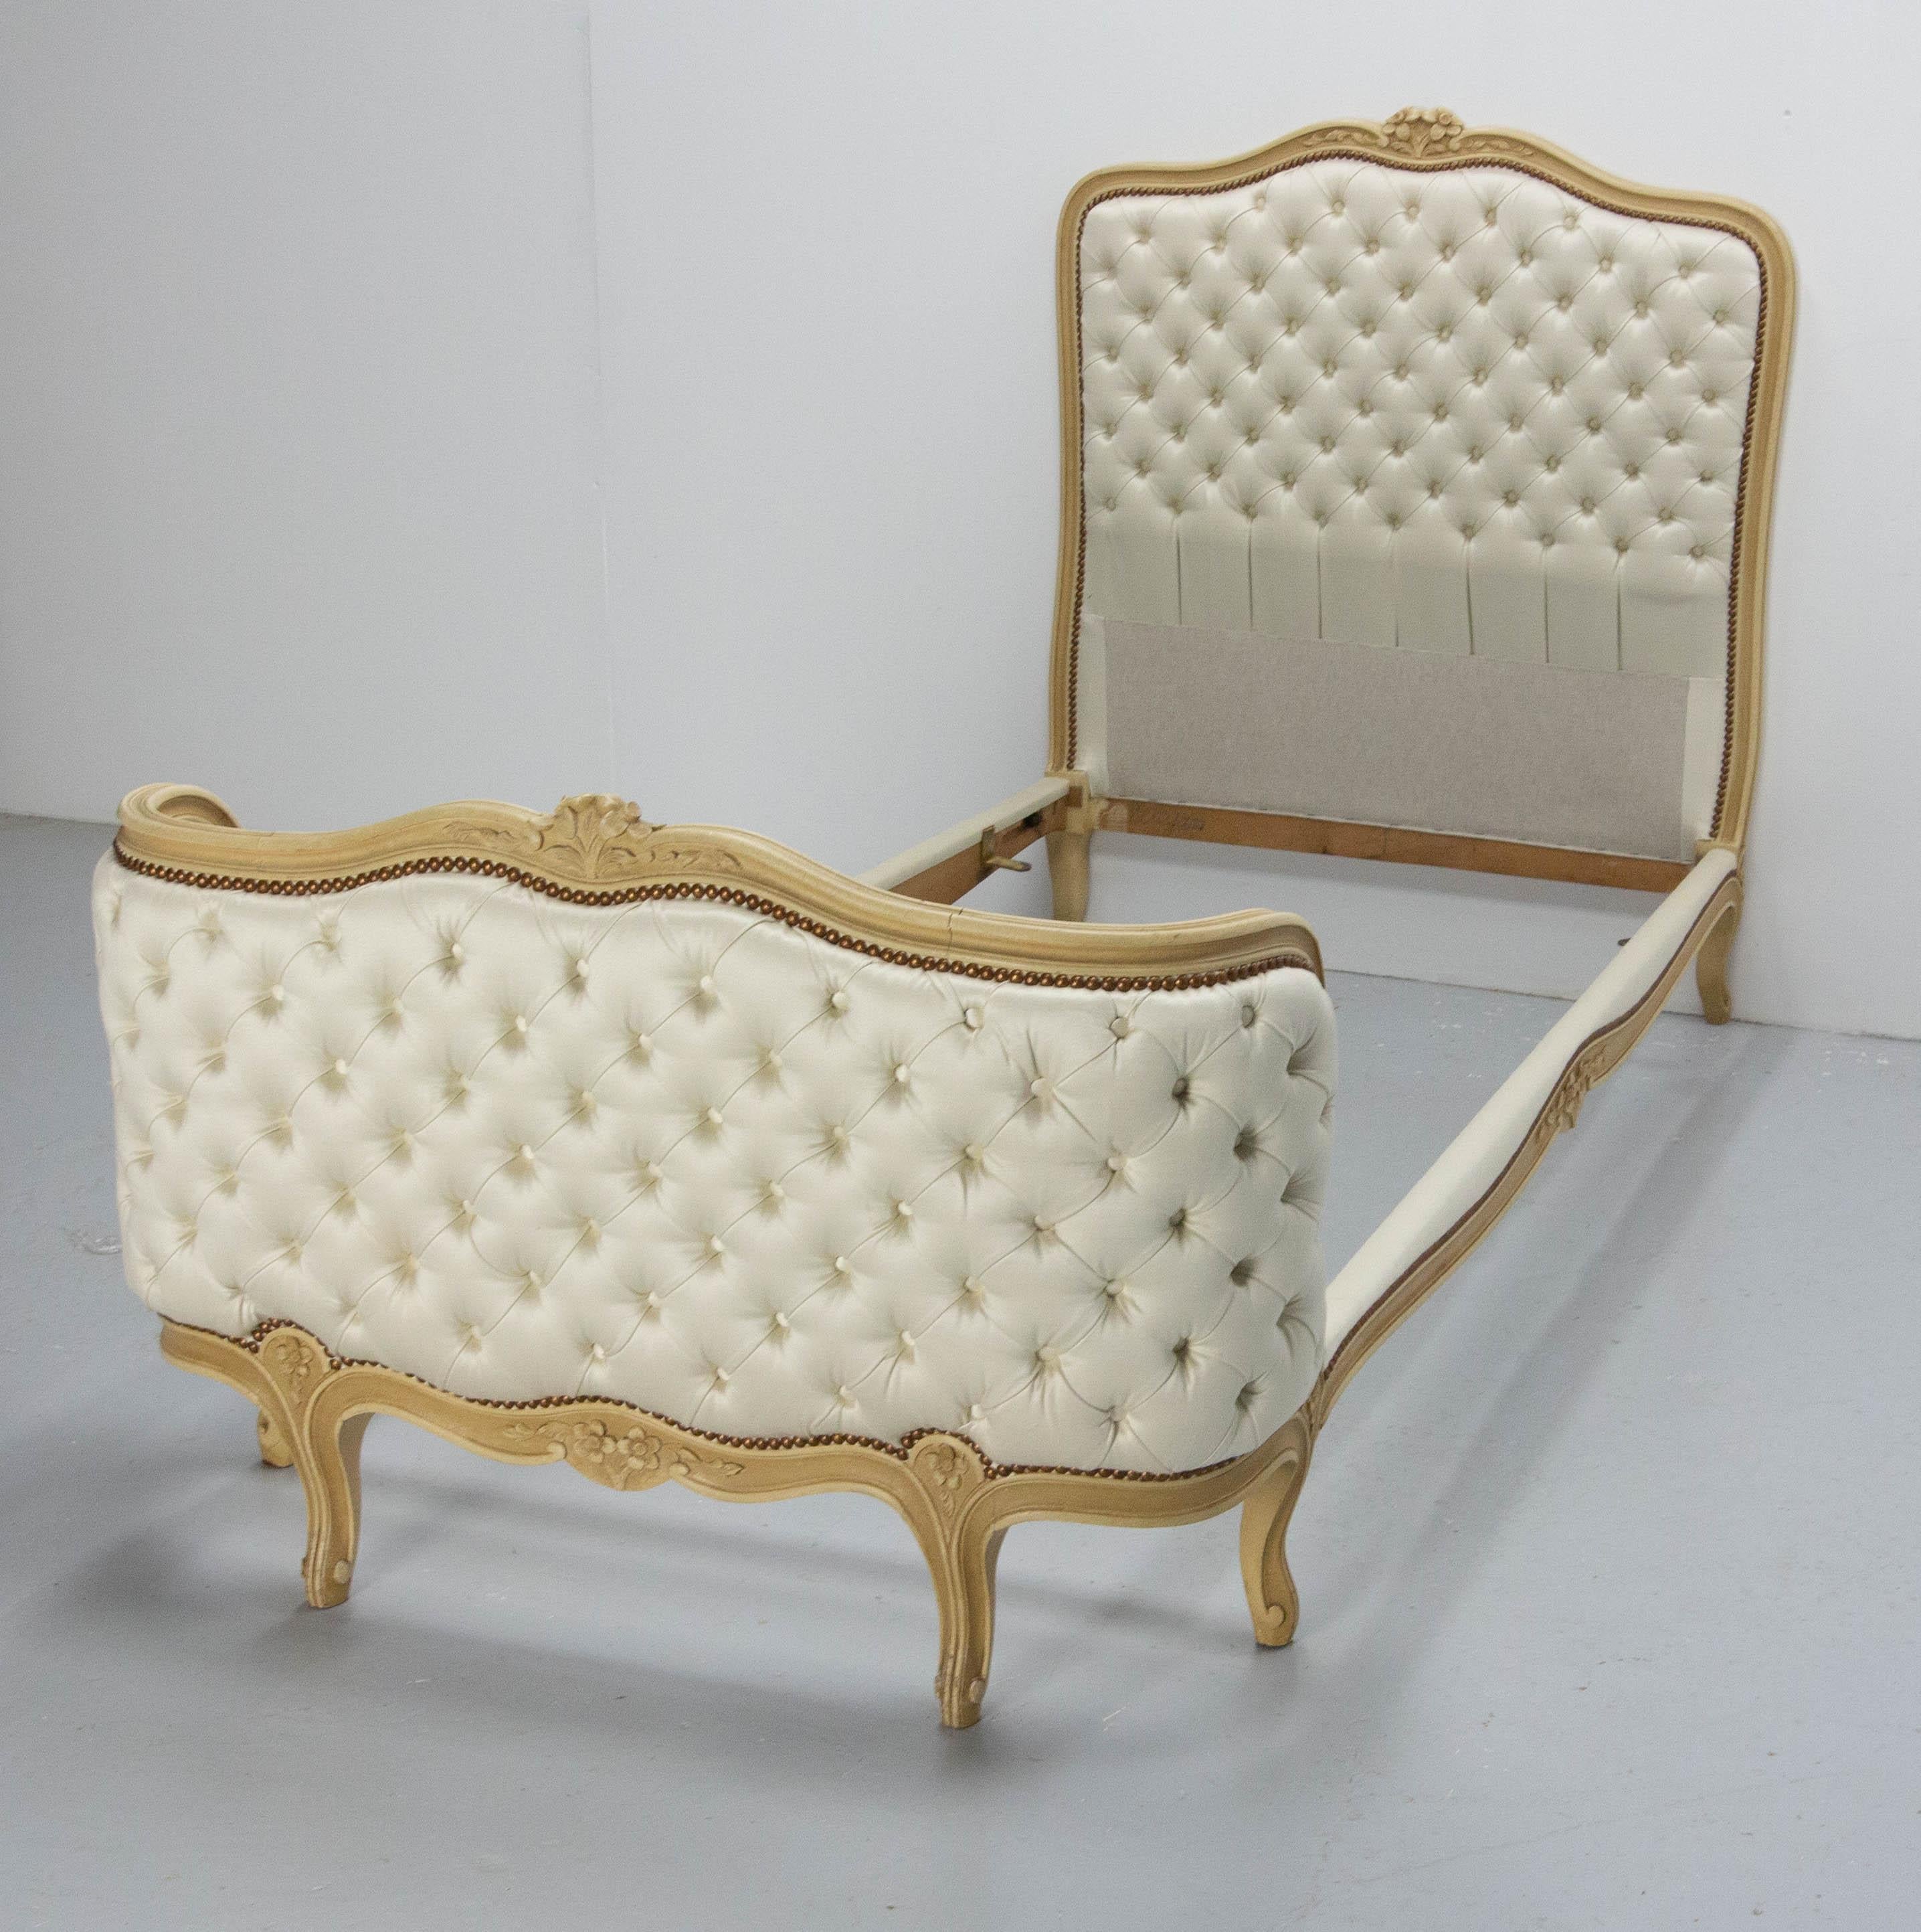 20th Century French Padded Louis XV Style Single Bed or Banquette, circa 1900 For Sale